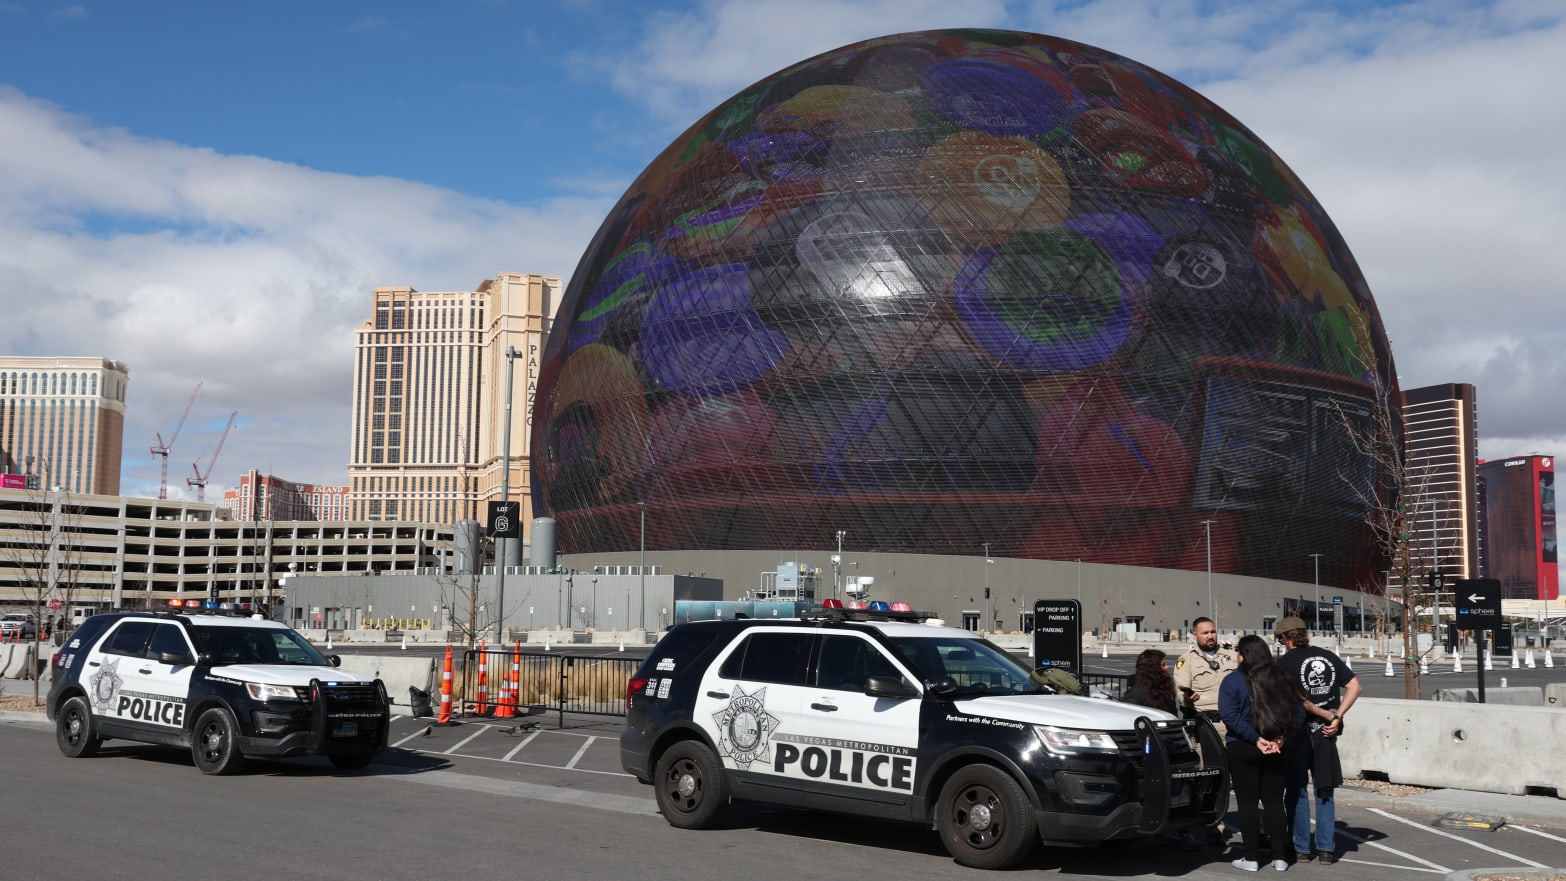 Individuals are seen in handcuffs near the Sphere after law enforcement responded to reports that pro-life activist Maison DesChamps (not pictured) had climbed to the top of the structure on February 07, 2024 in Las Vegas, Nevada. 